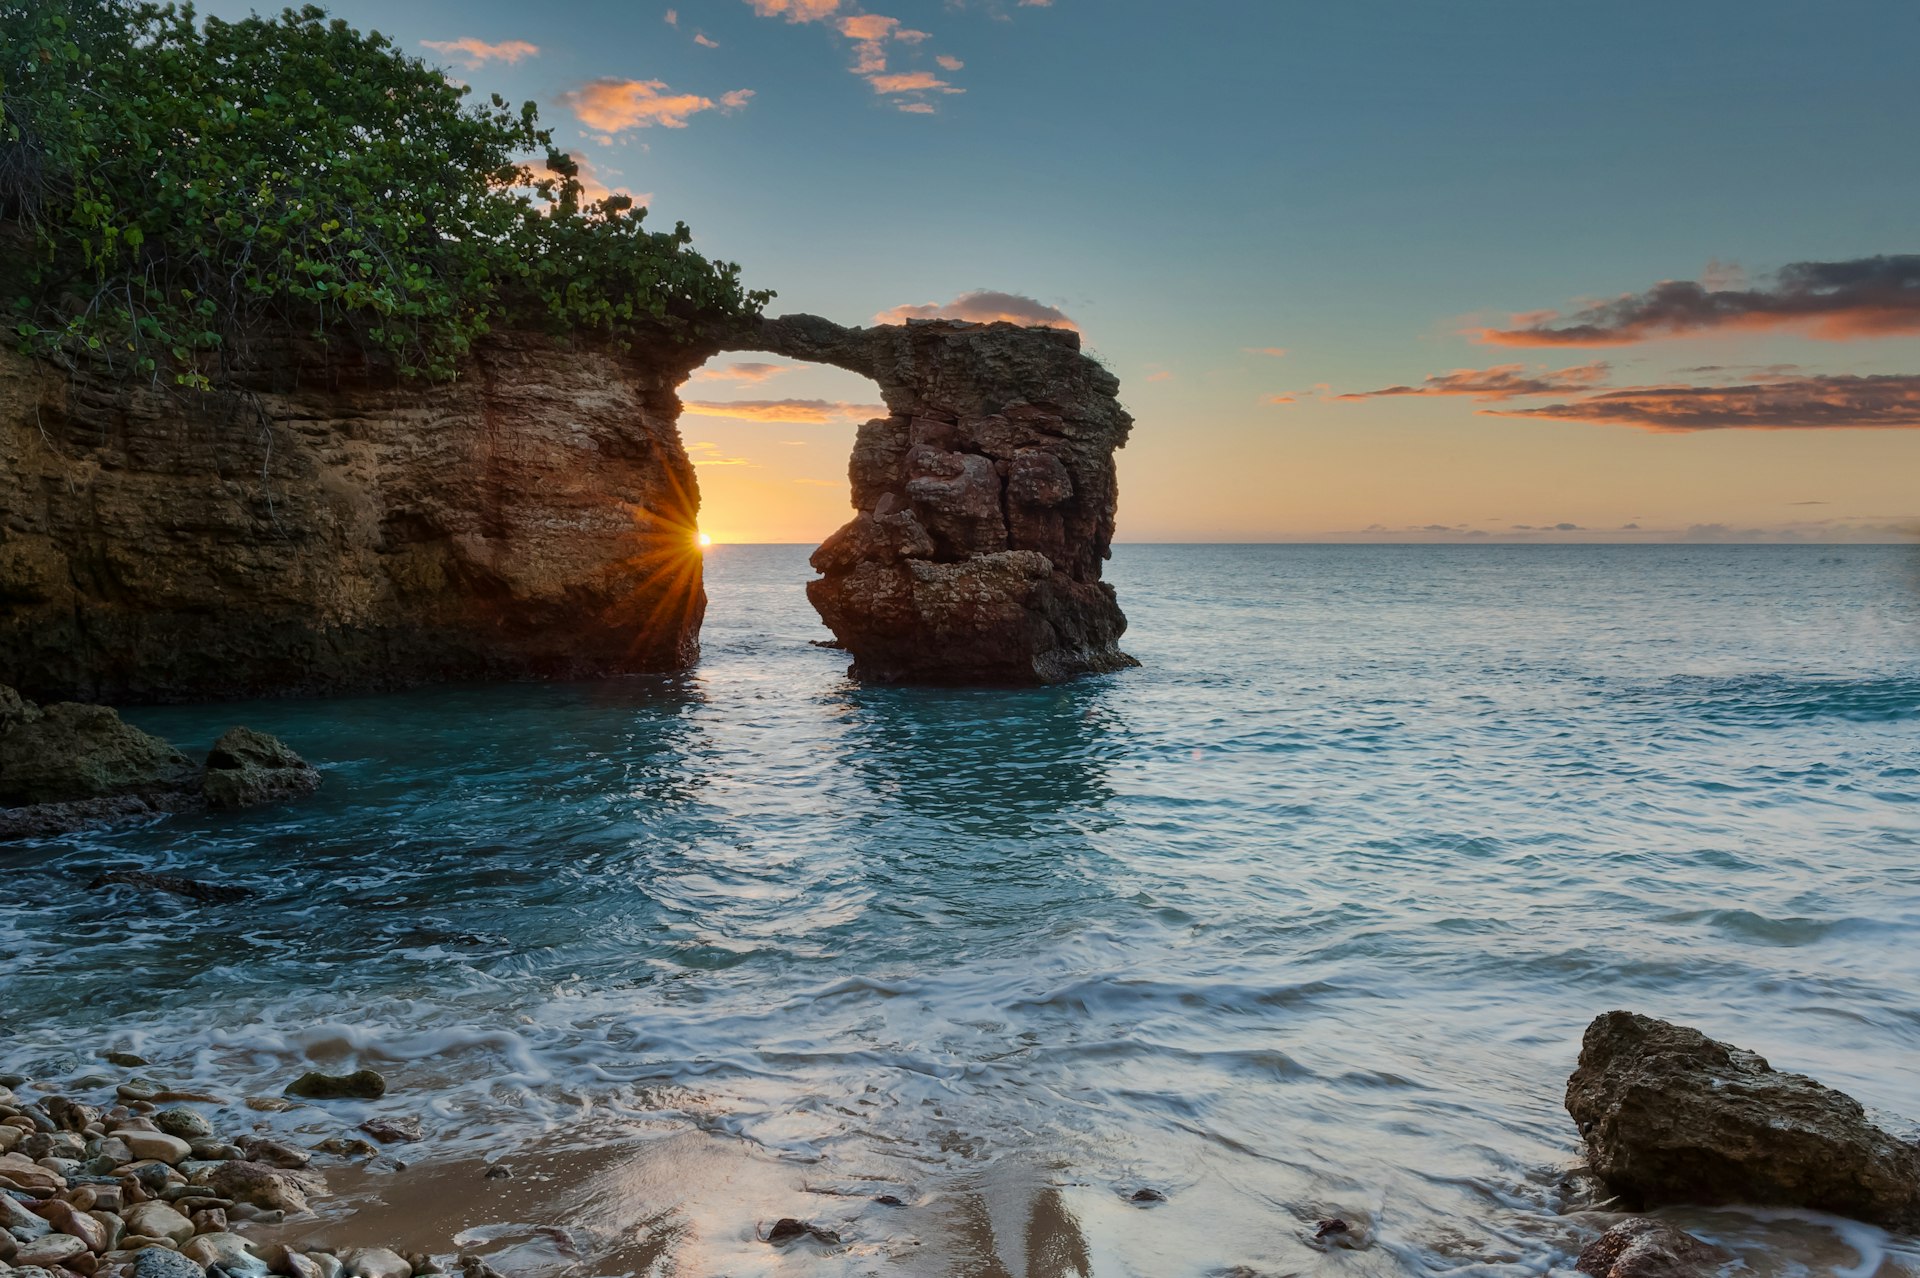 Looking at the sunset through the natural bridge formed by rocks near the Cabo Rojo Lighthouse, Puerto Rico